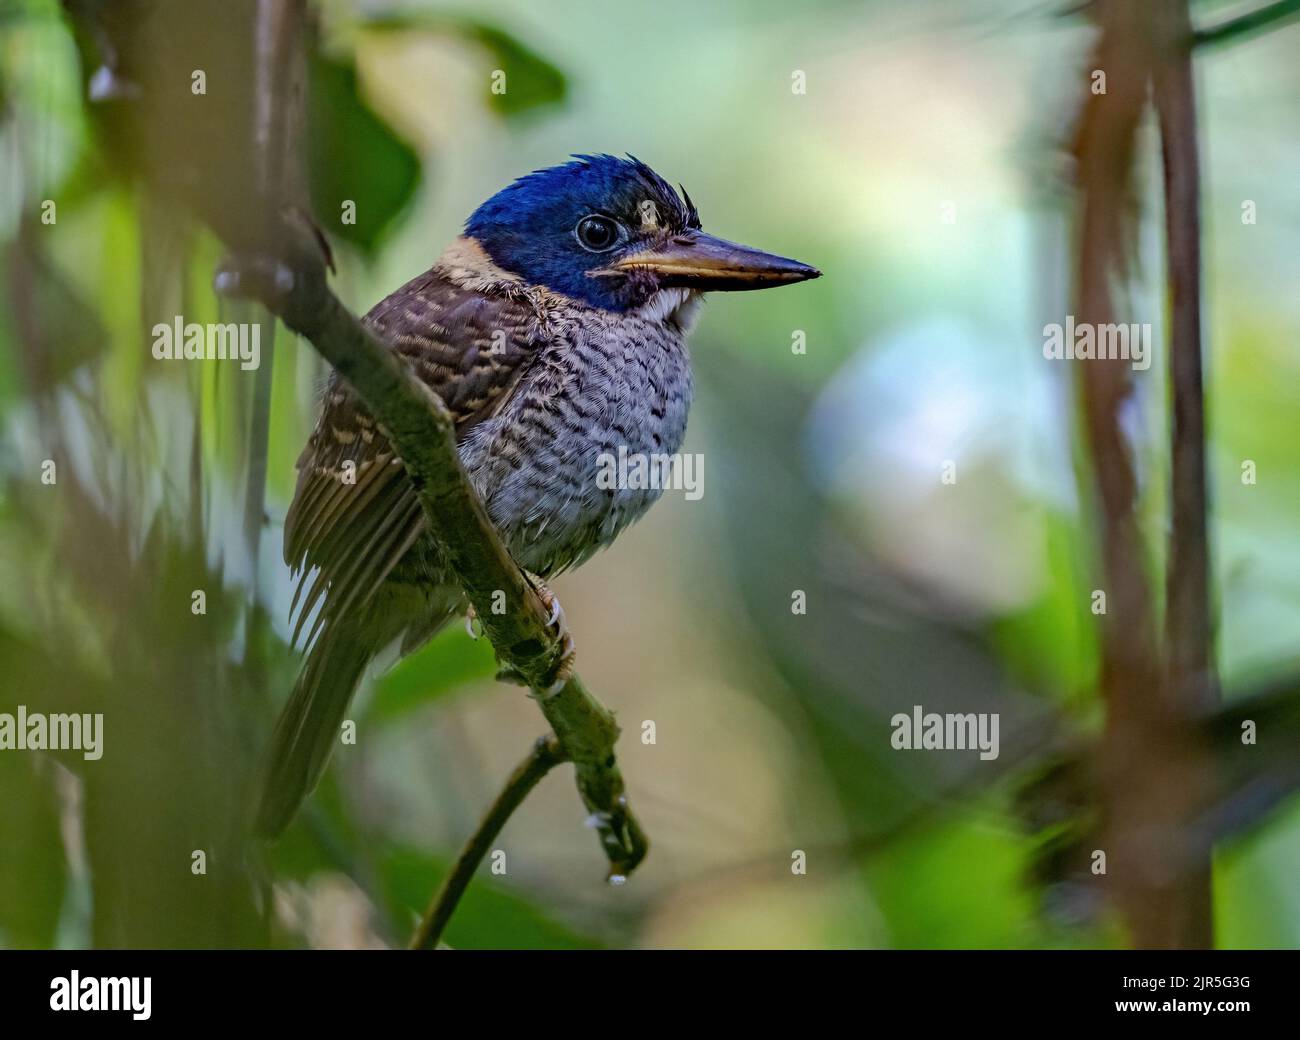 A Scaly-breasted Kingfisher (Actenoides princeps) perched on a branch. Sulawesi, Indonesia. Stock Photo